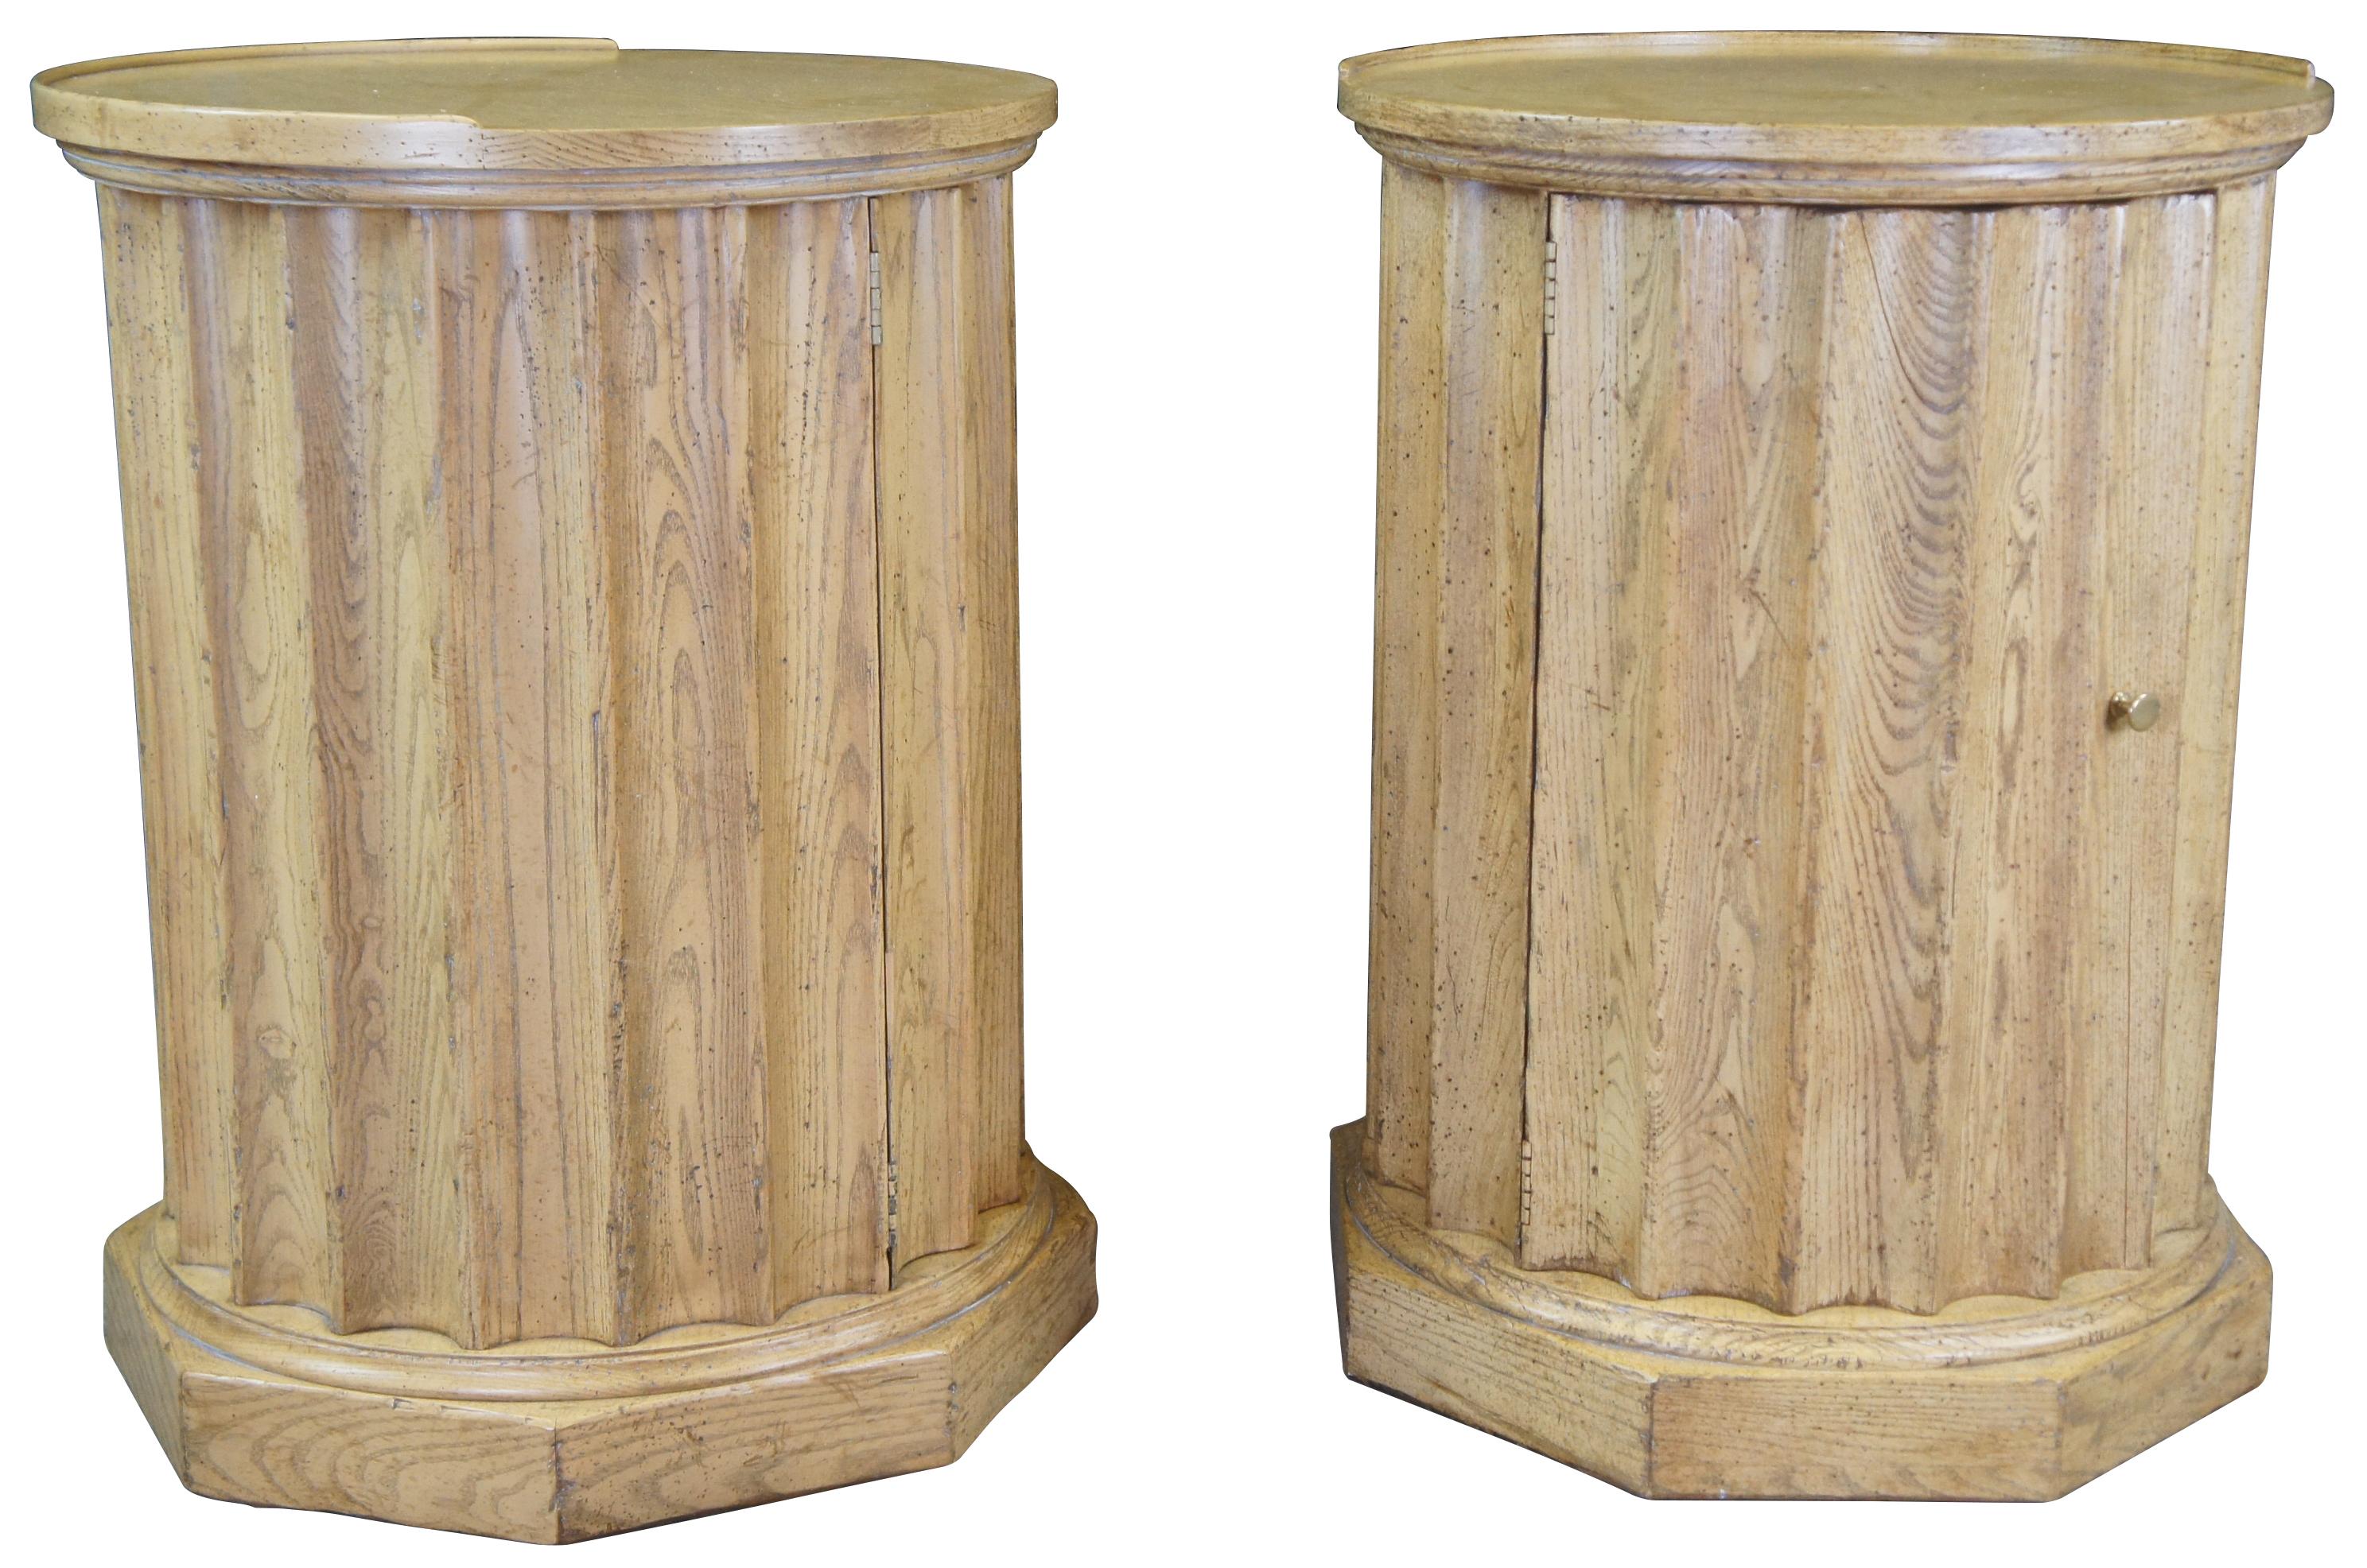 Classical pair of Baker Furniture Corinthian column style side tables, circa 1970s.  Made from oak with with a round Matchbook veneer top, scalloped center and octagonal shaped base.  Each cabinet opens to an interior shelf.  Marked  #2759 along